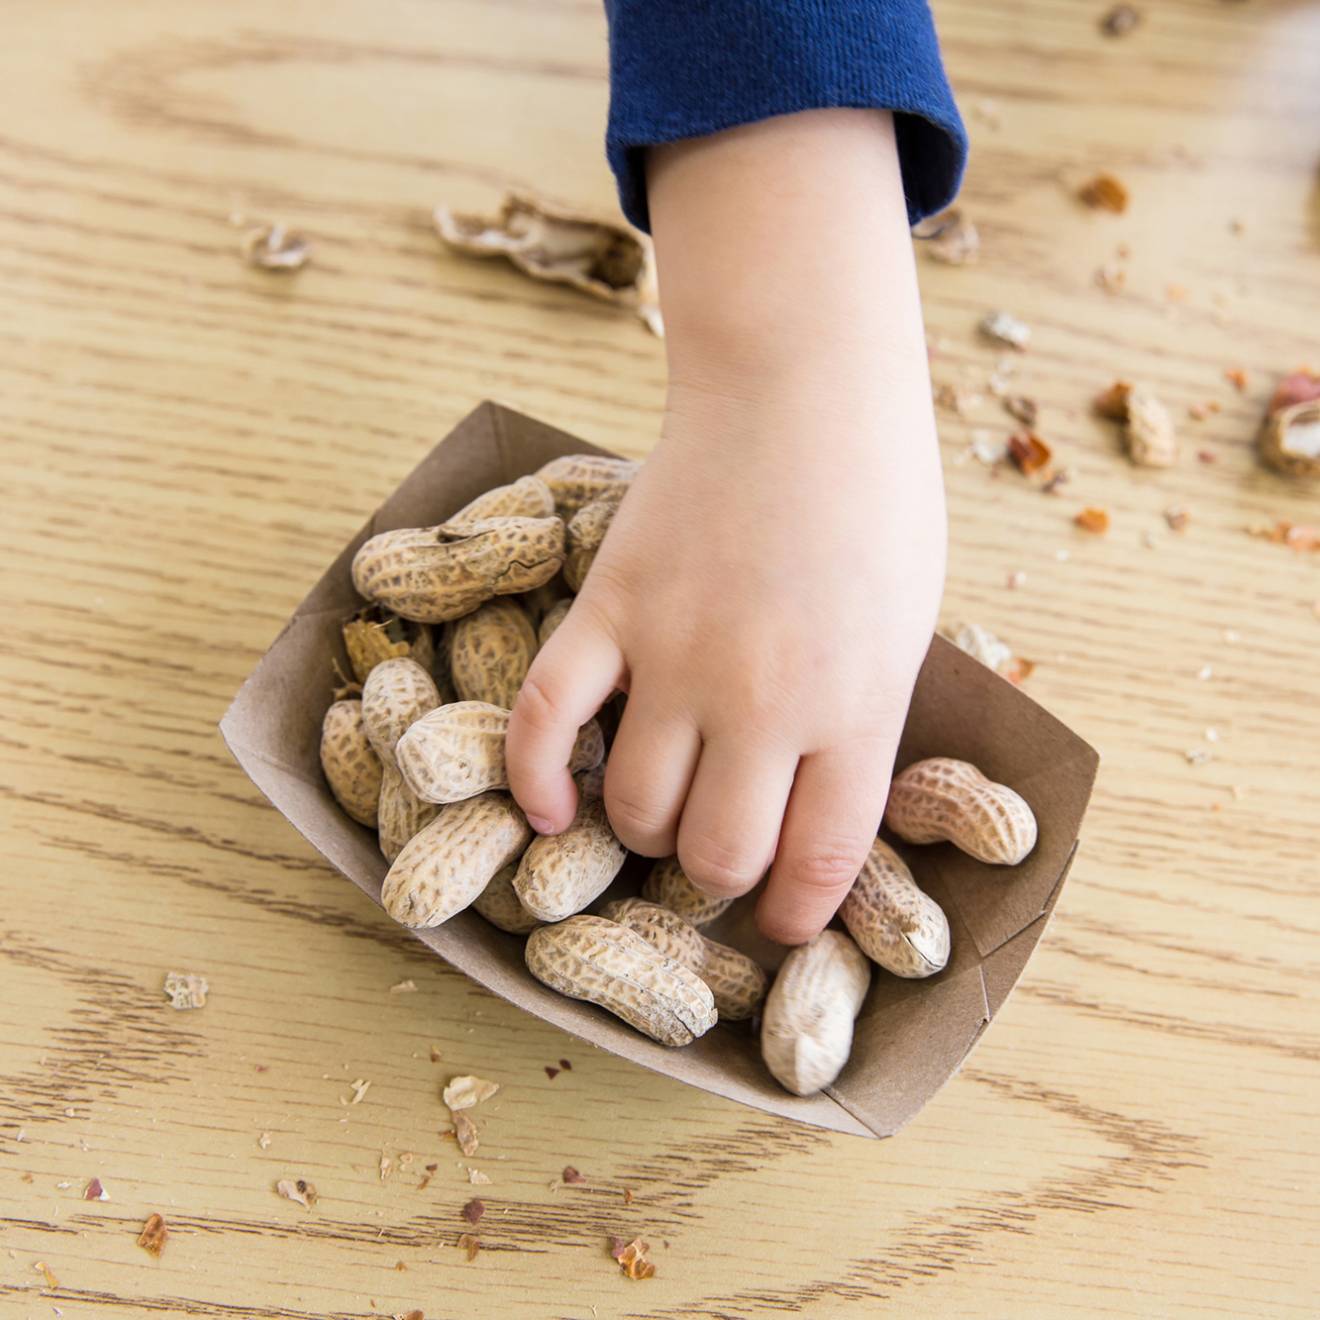 A child's hand reaching for peanuts